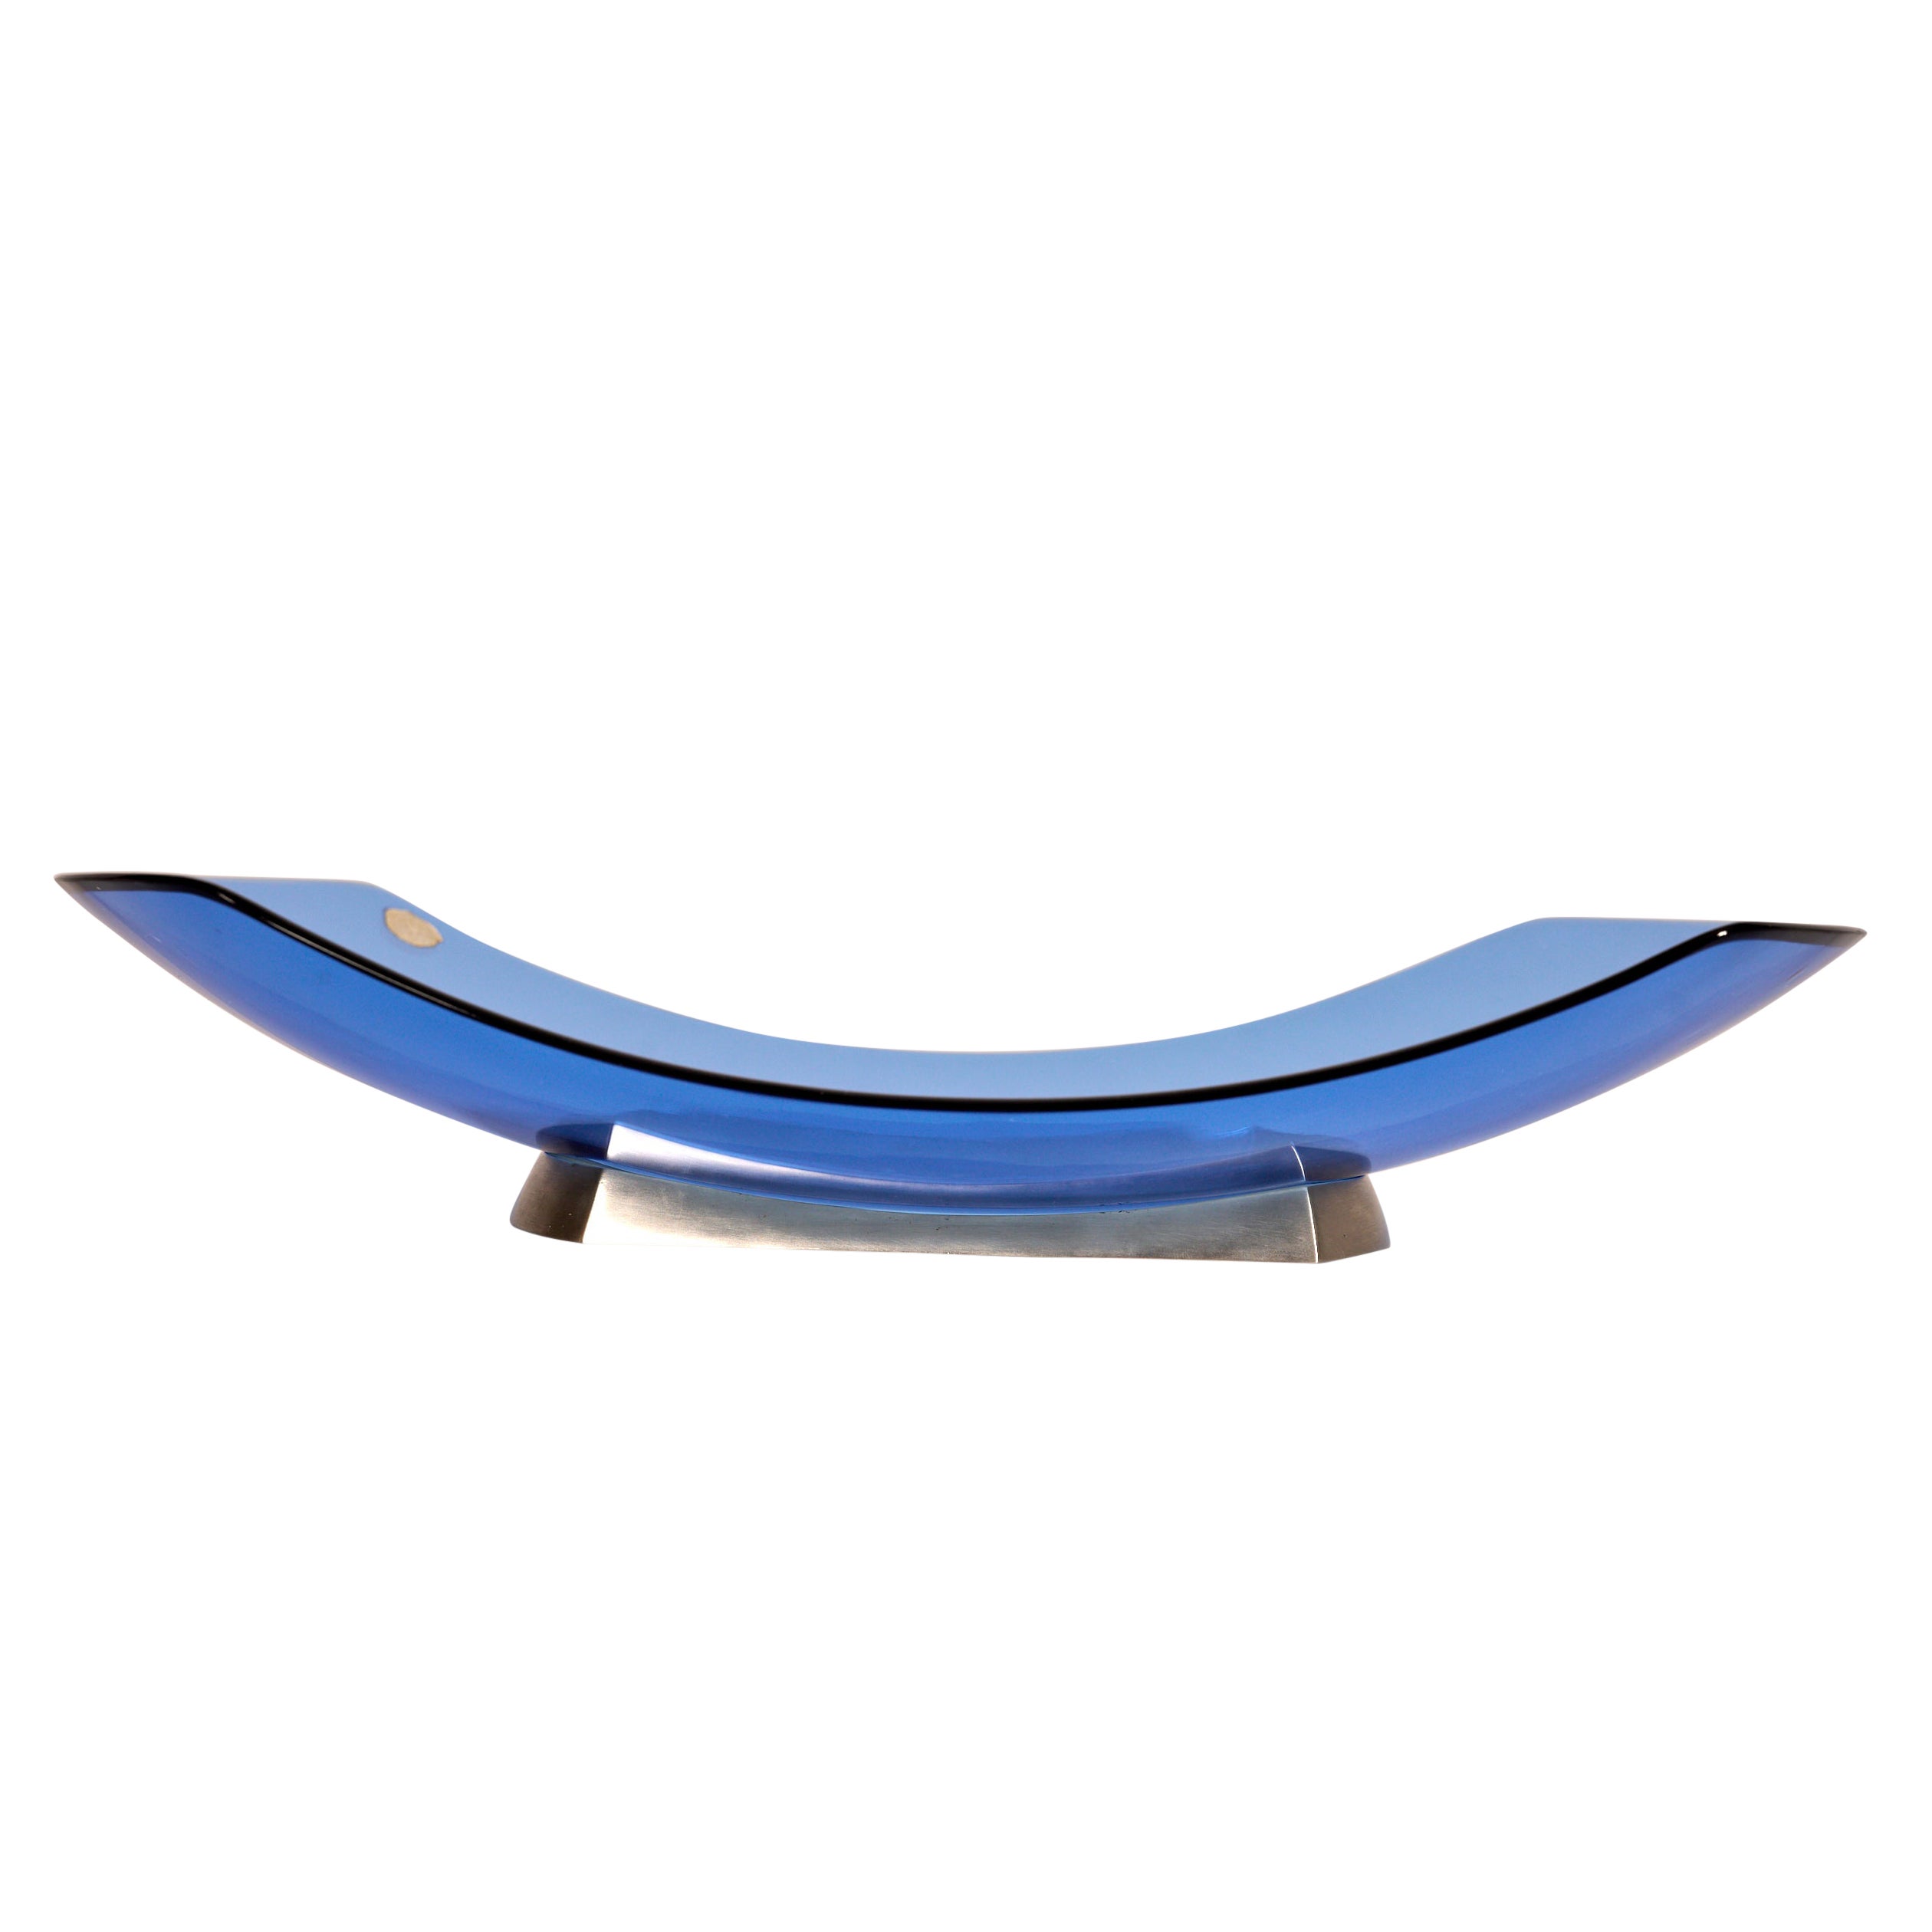 Fruit Bowl in Blue Glass by Max Ingrand for Fontana Arte "Model 1419", c 1960 For Sale